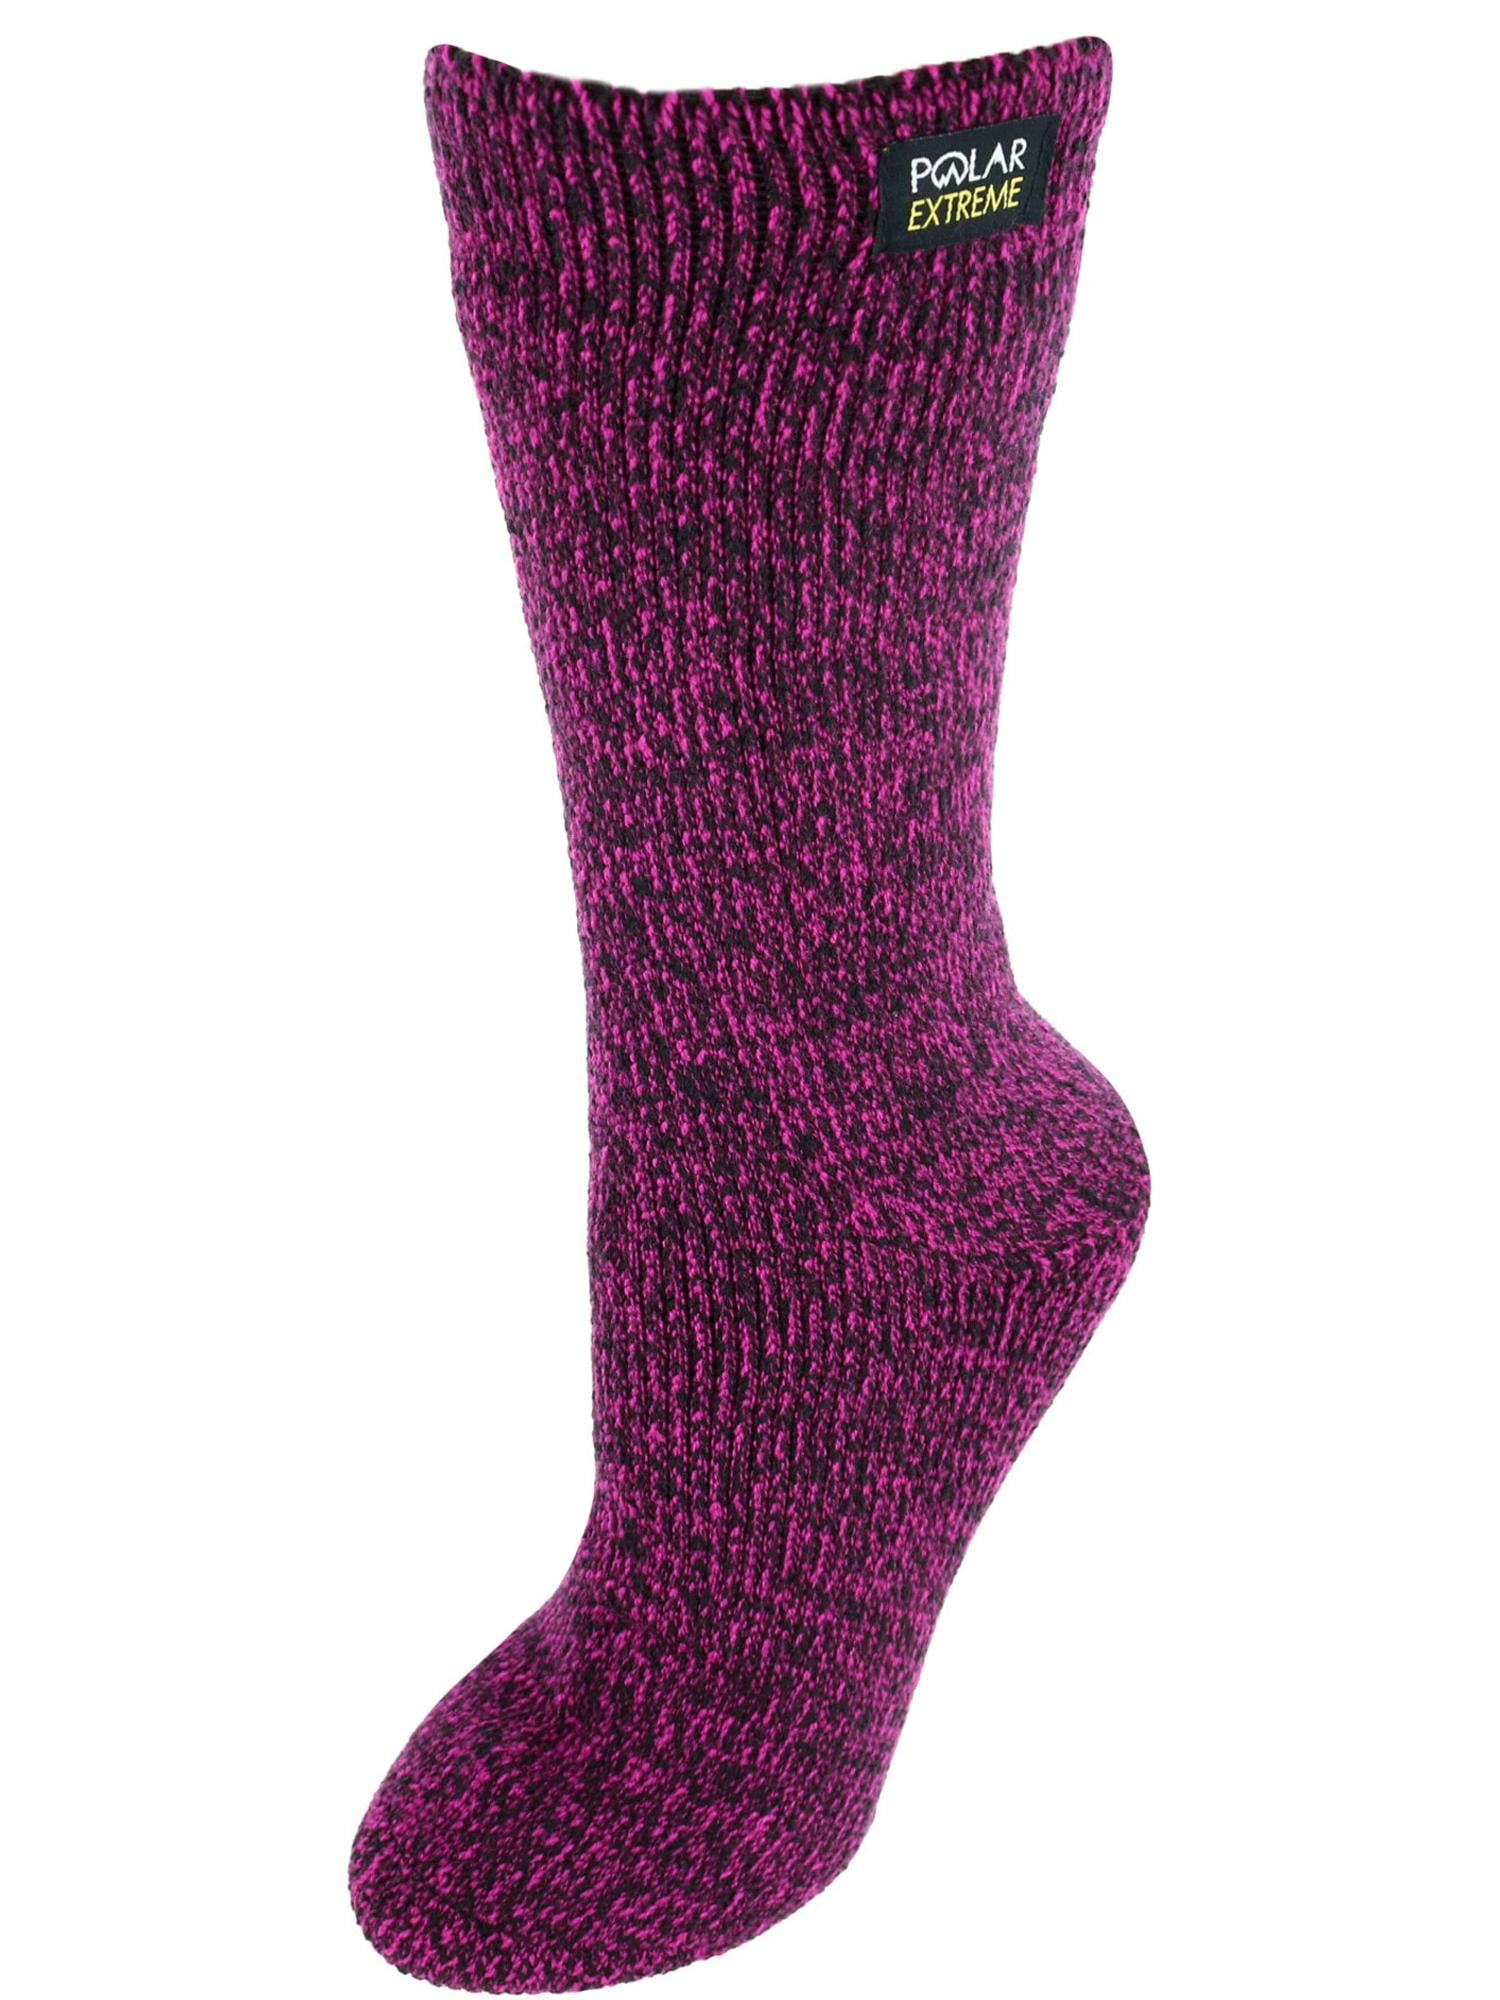 Polar Extreme Marled Insulated Thermal Socks with Fleece Lining